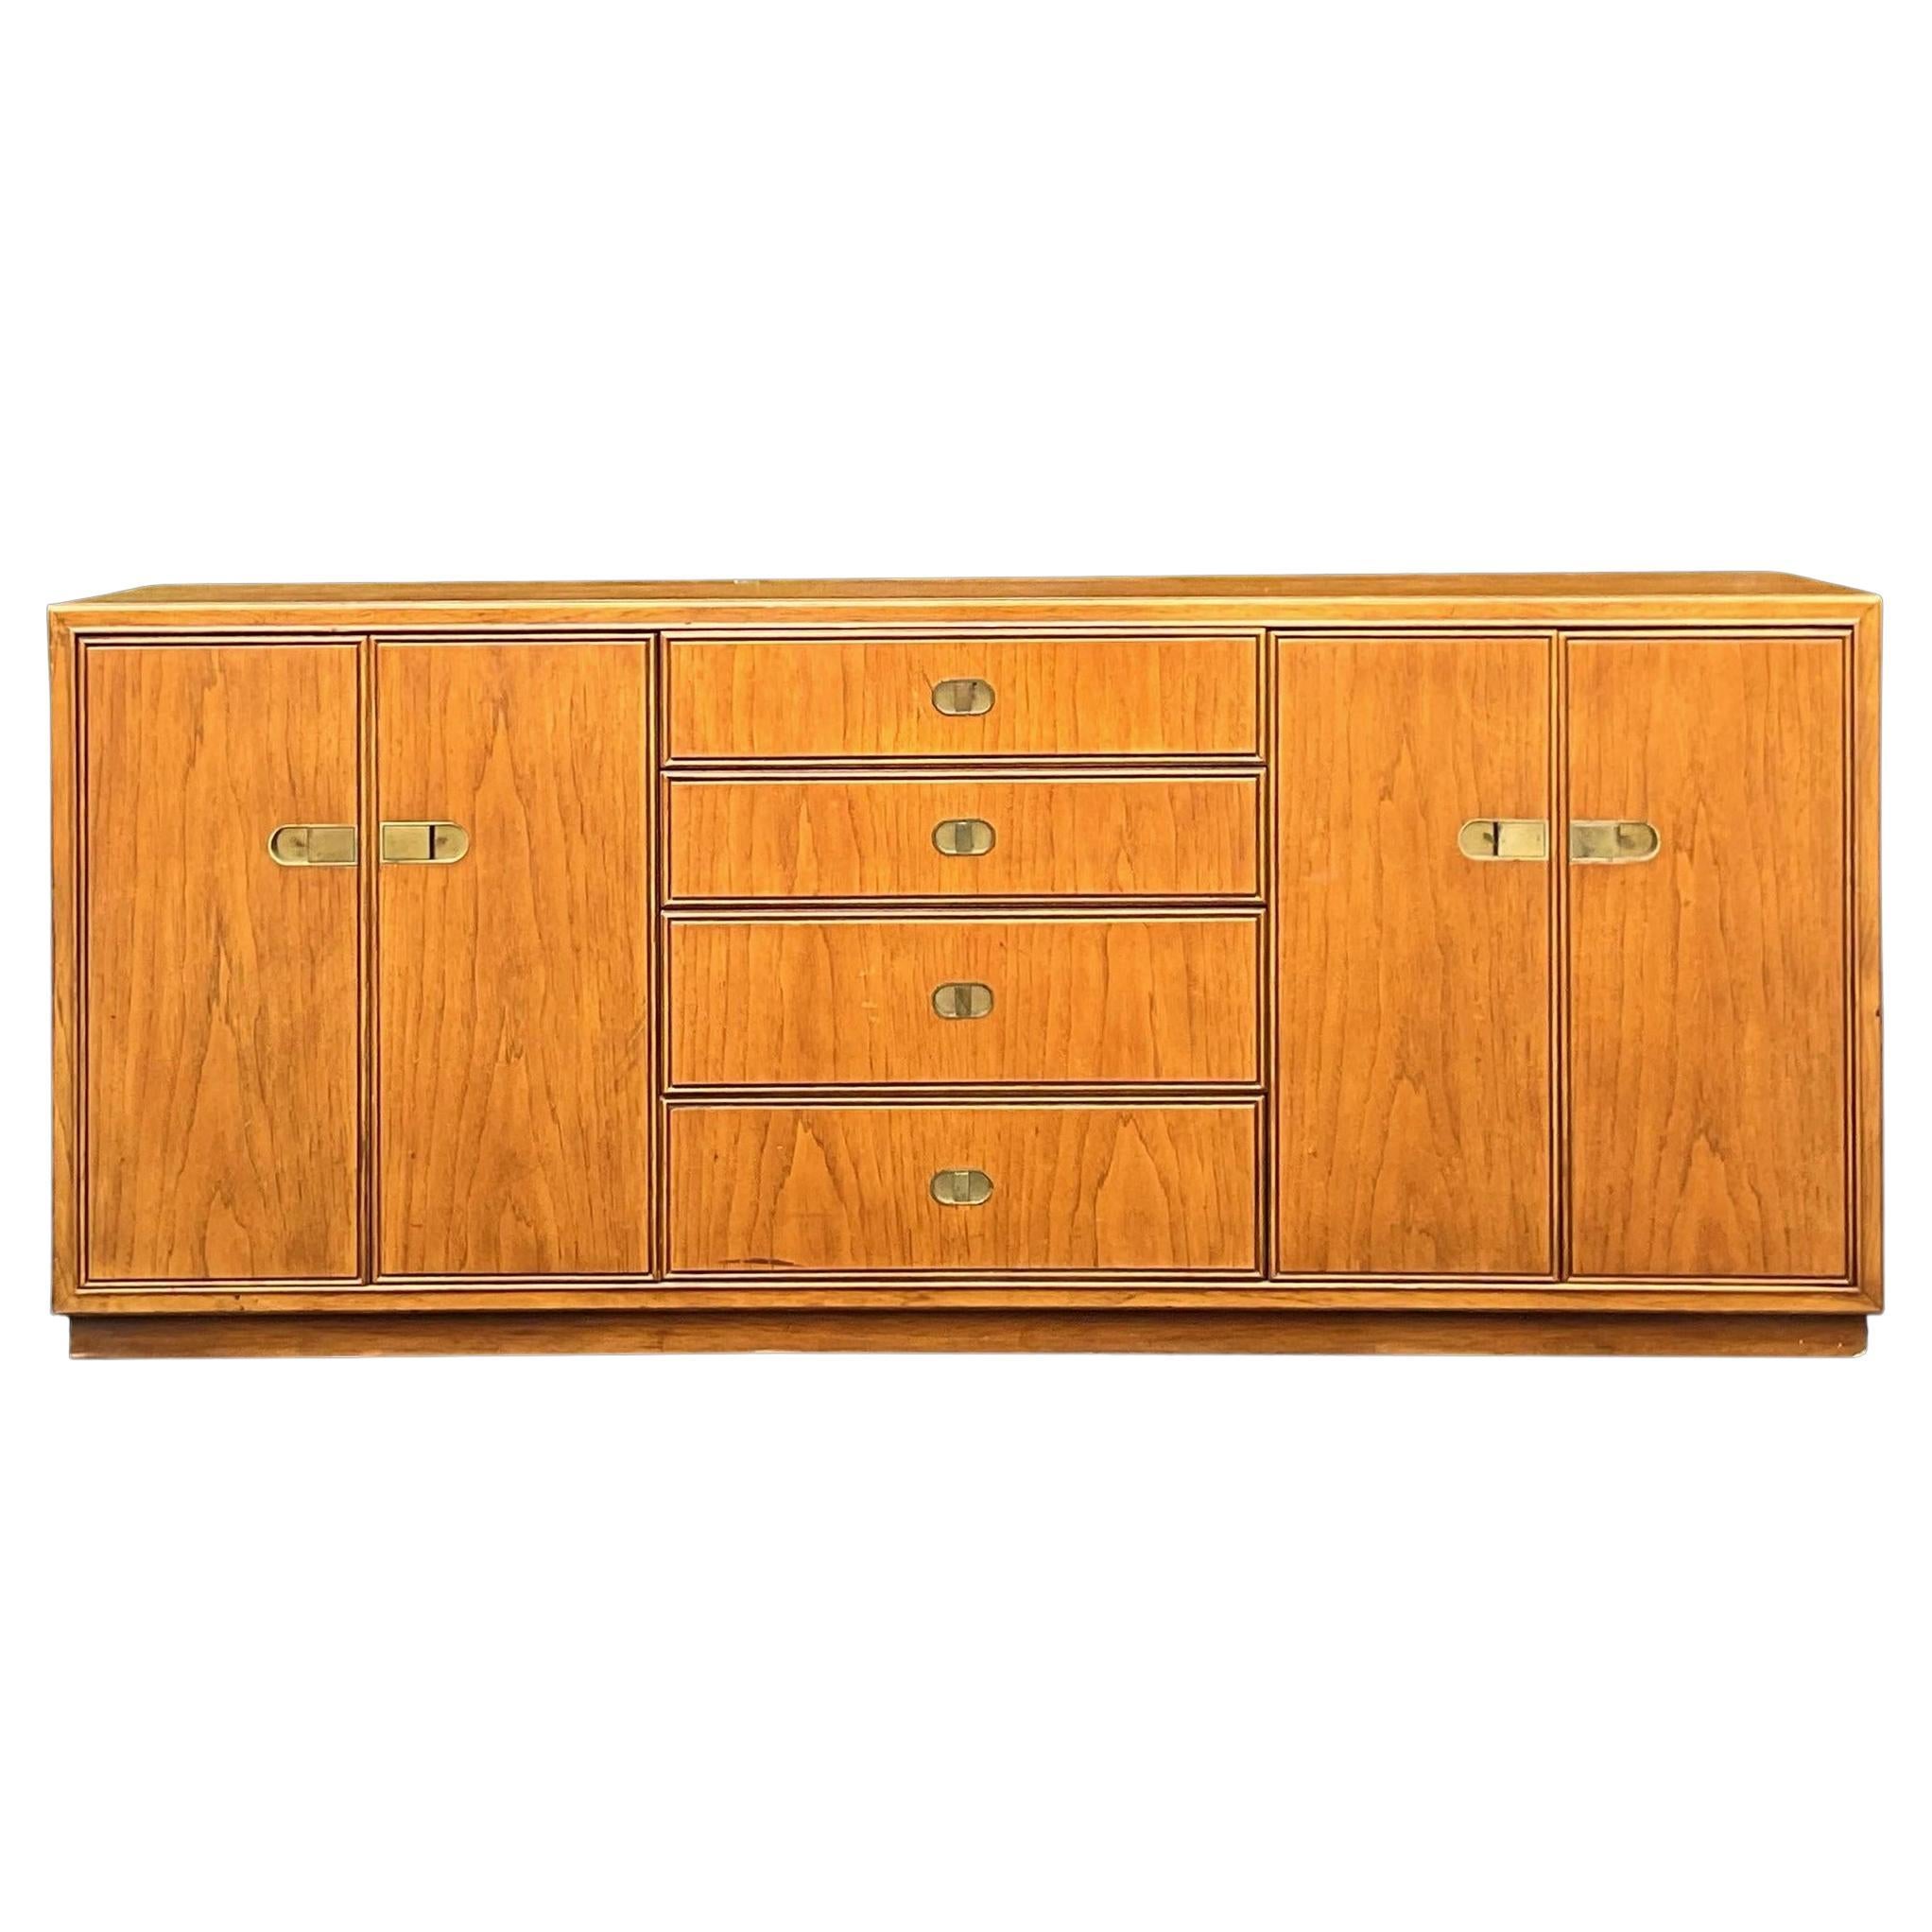 Late 20th Century Vintage Drexel Three Section Credenza For Sale